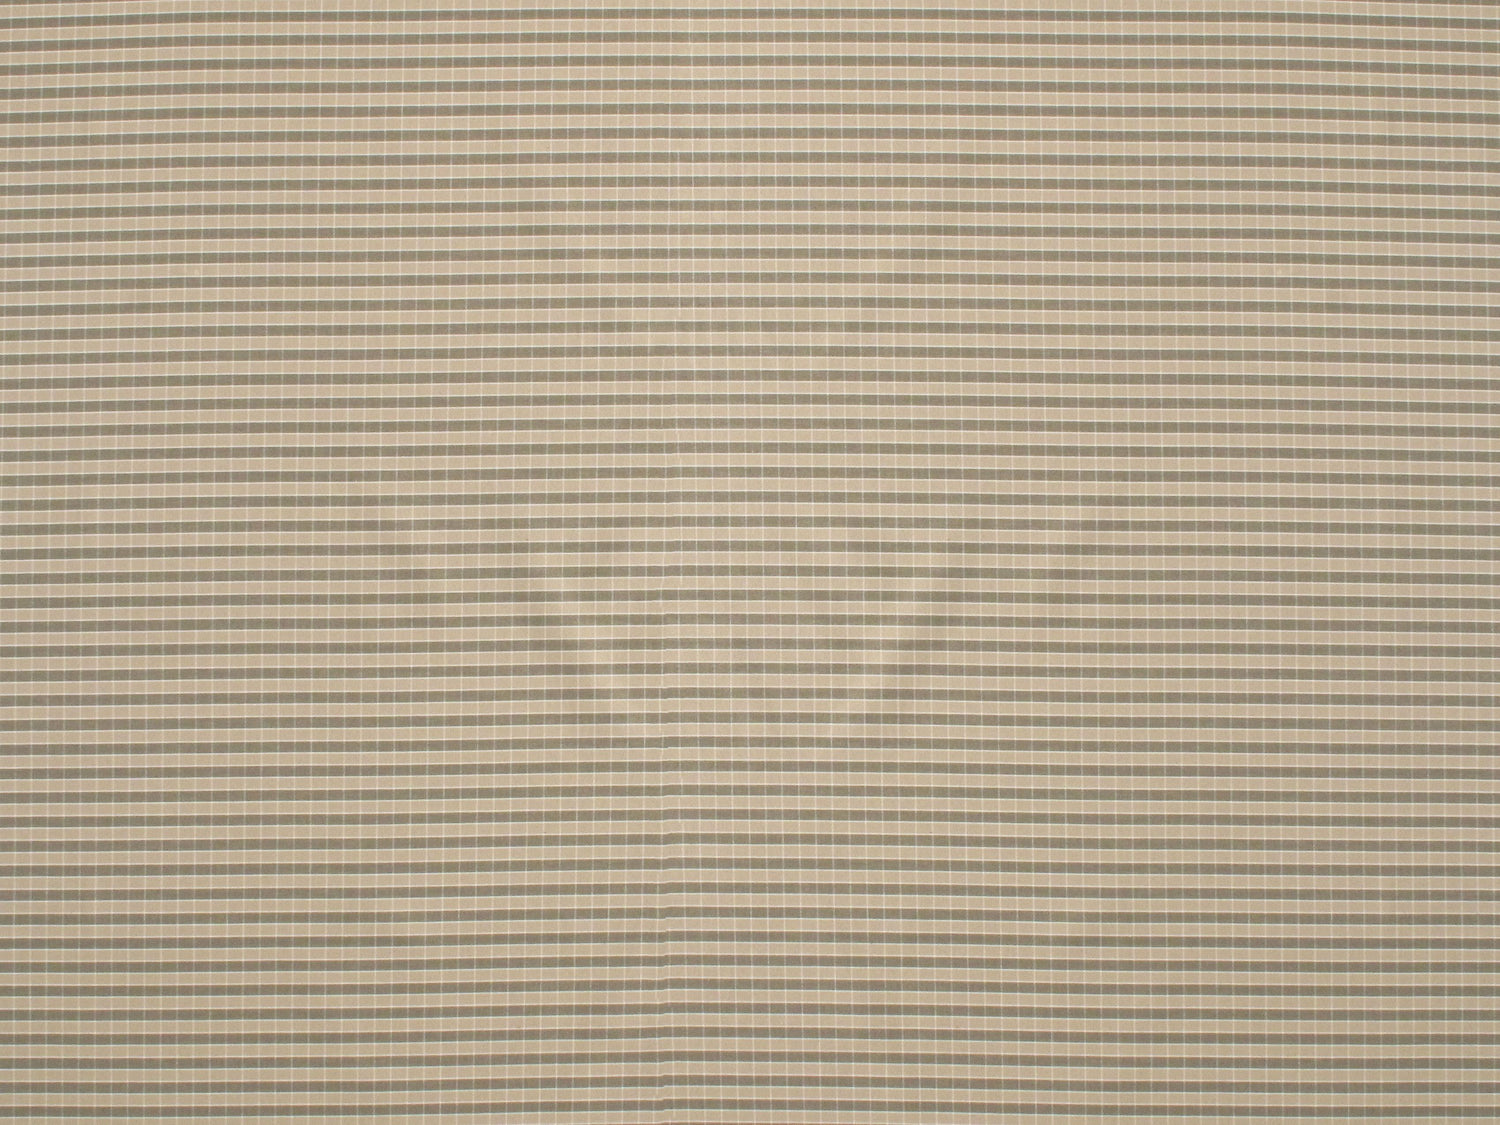 Oxford Check fabric in tan white color - pattern number LE 00051258 - by Scalamandre in the Old World Weavers collection